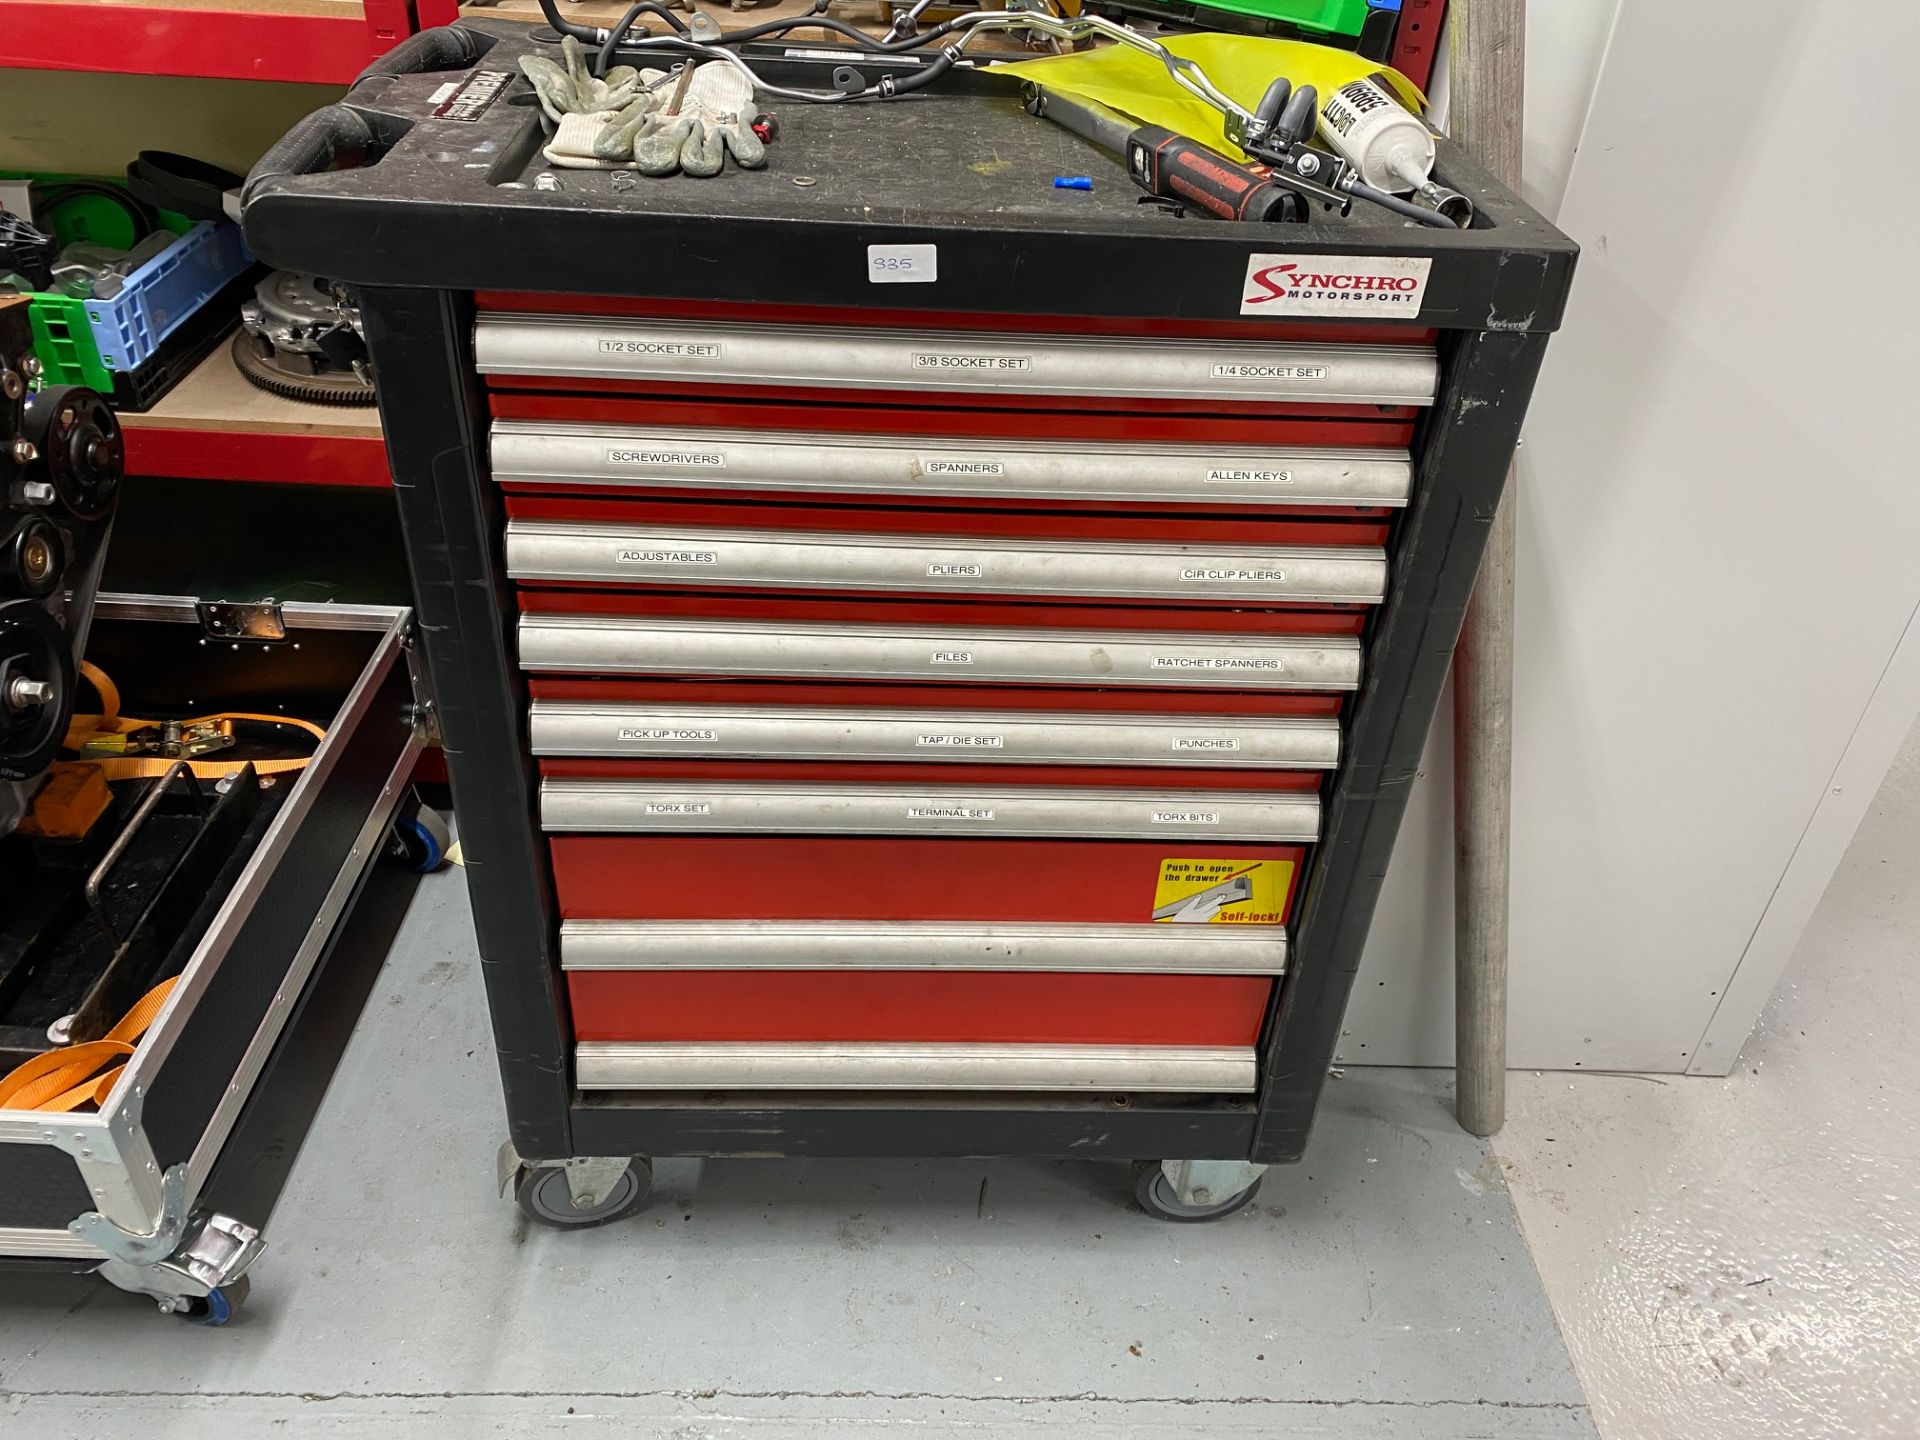 Sealey Premier 8 drawer mobile toolbox including the following tools, metric sockets 10-32mm, 1/